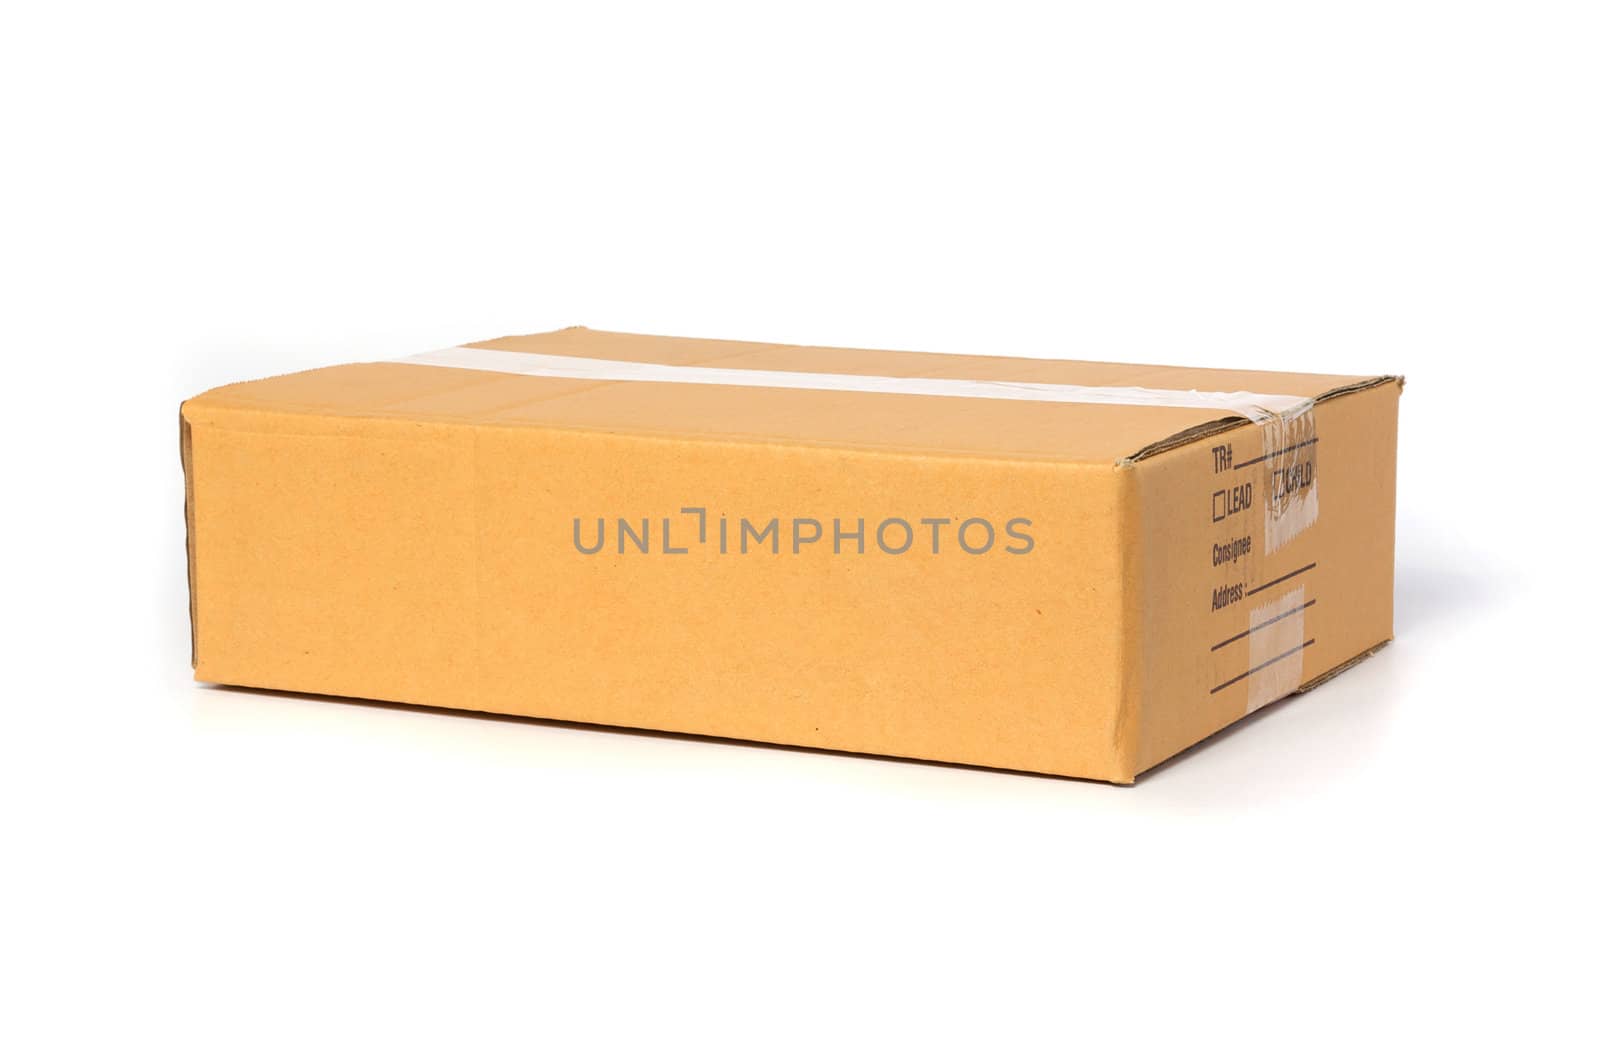 Cardboard box isolated on white background by posterize